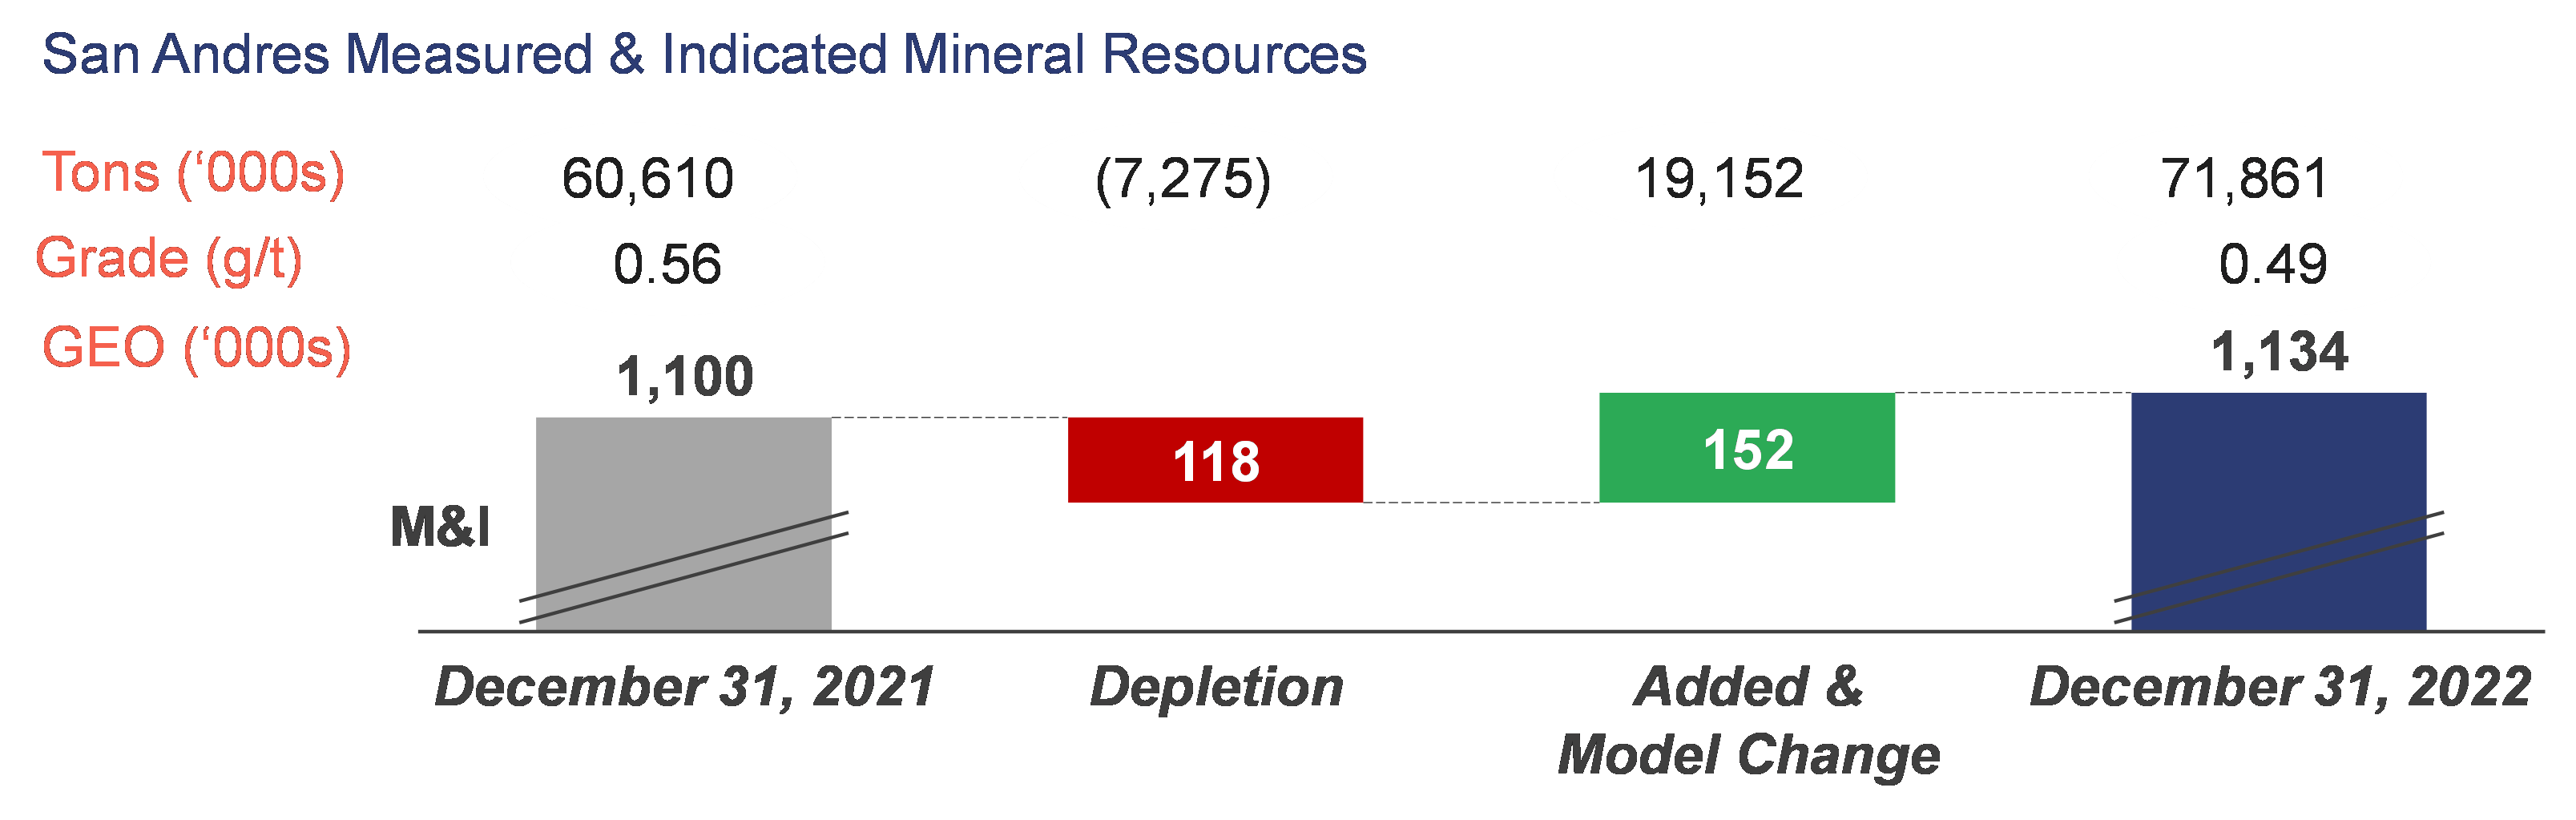 San Andres Measured & Indicated Mineral Resources